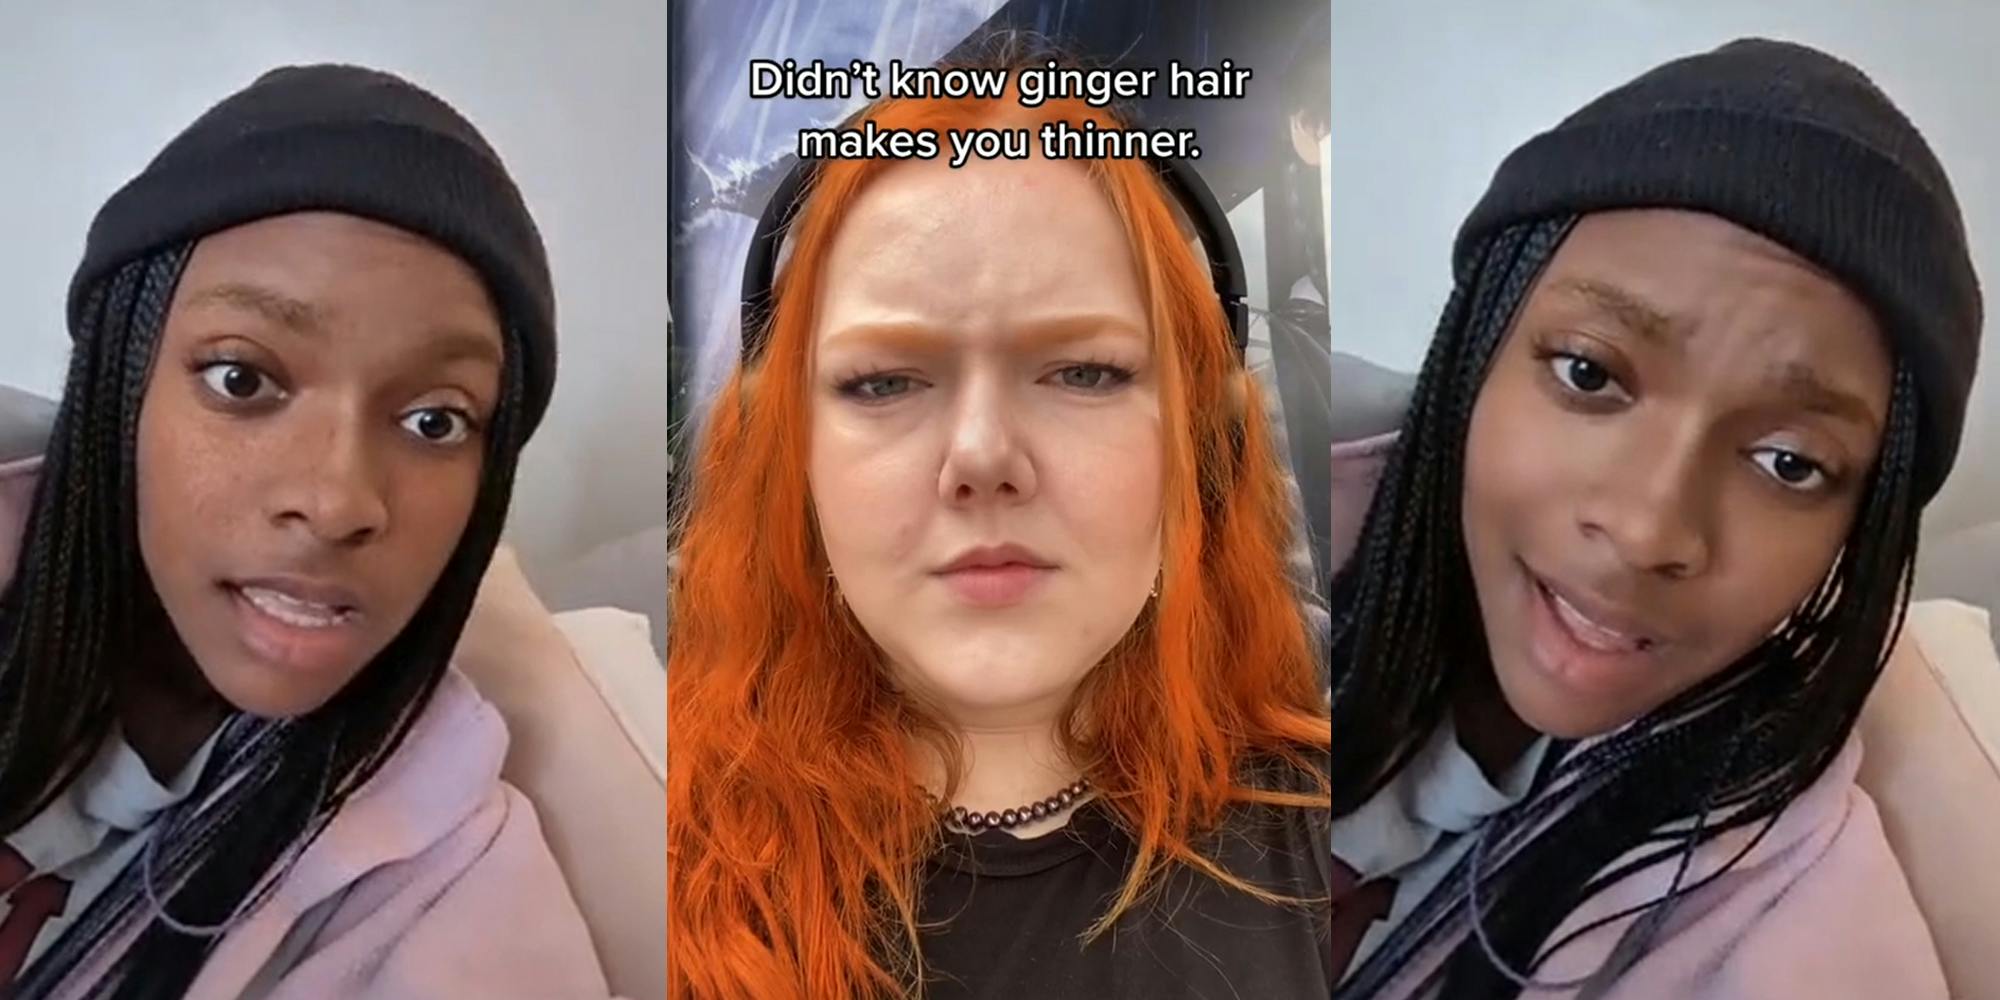 woman speaking with ginger TikTok filter on (l) woman with ginger TikTok filter on caption 'Didn't know ginger hair makes you thinner' (c) woman speaking (r)